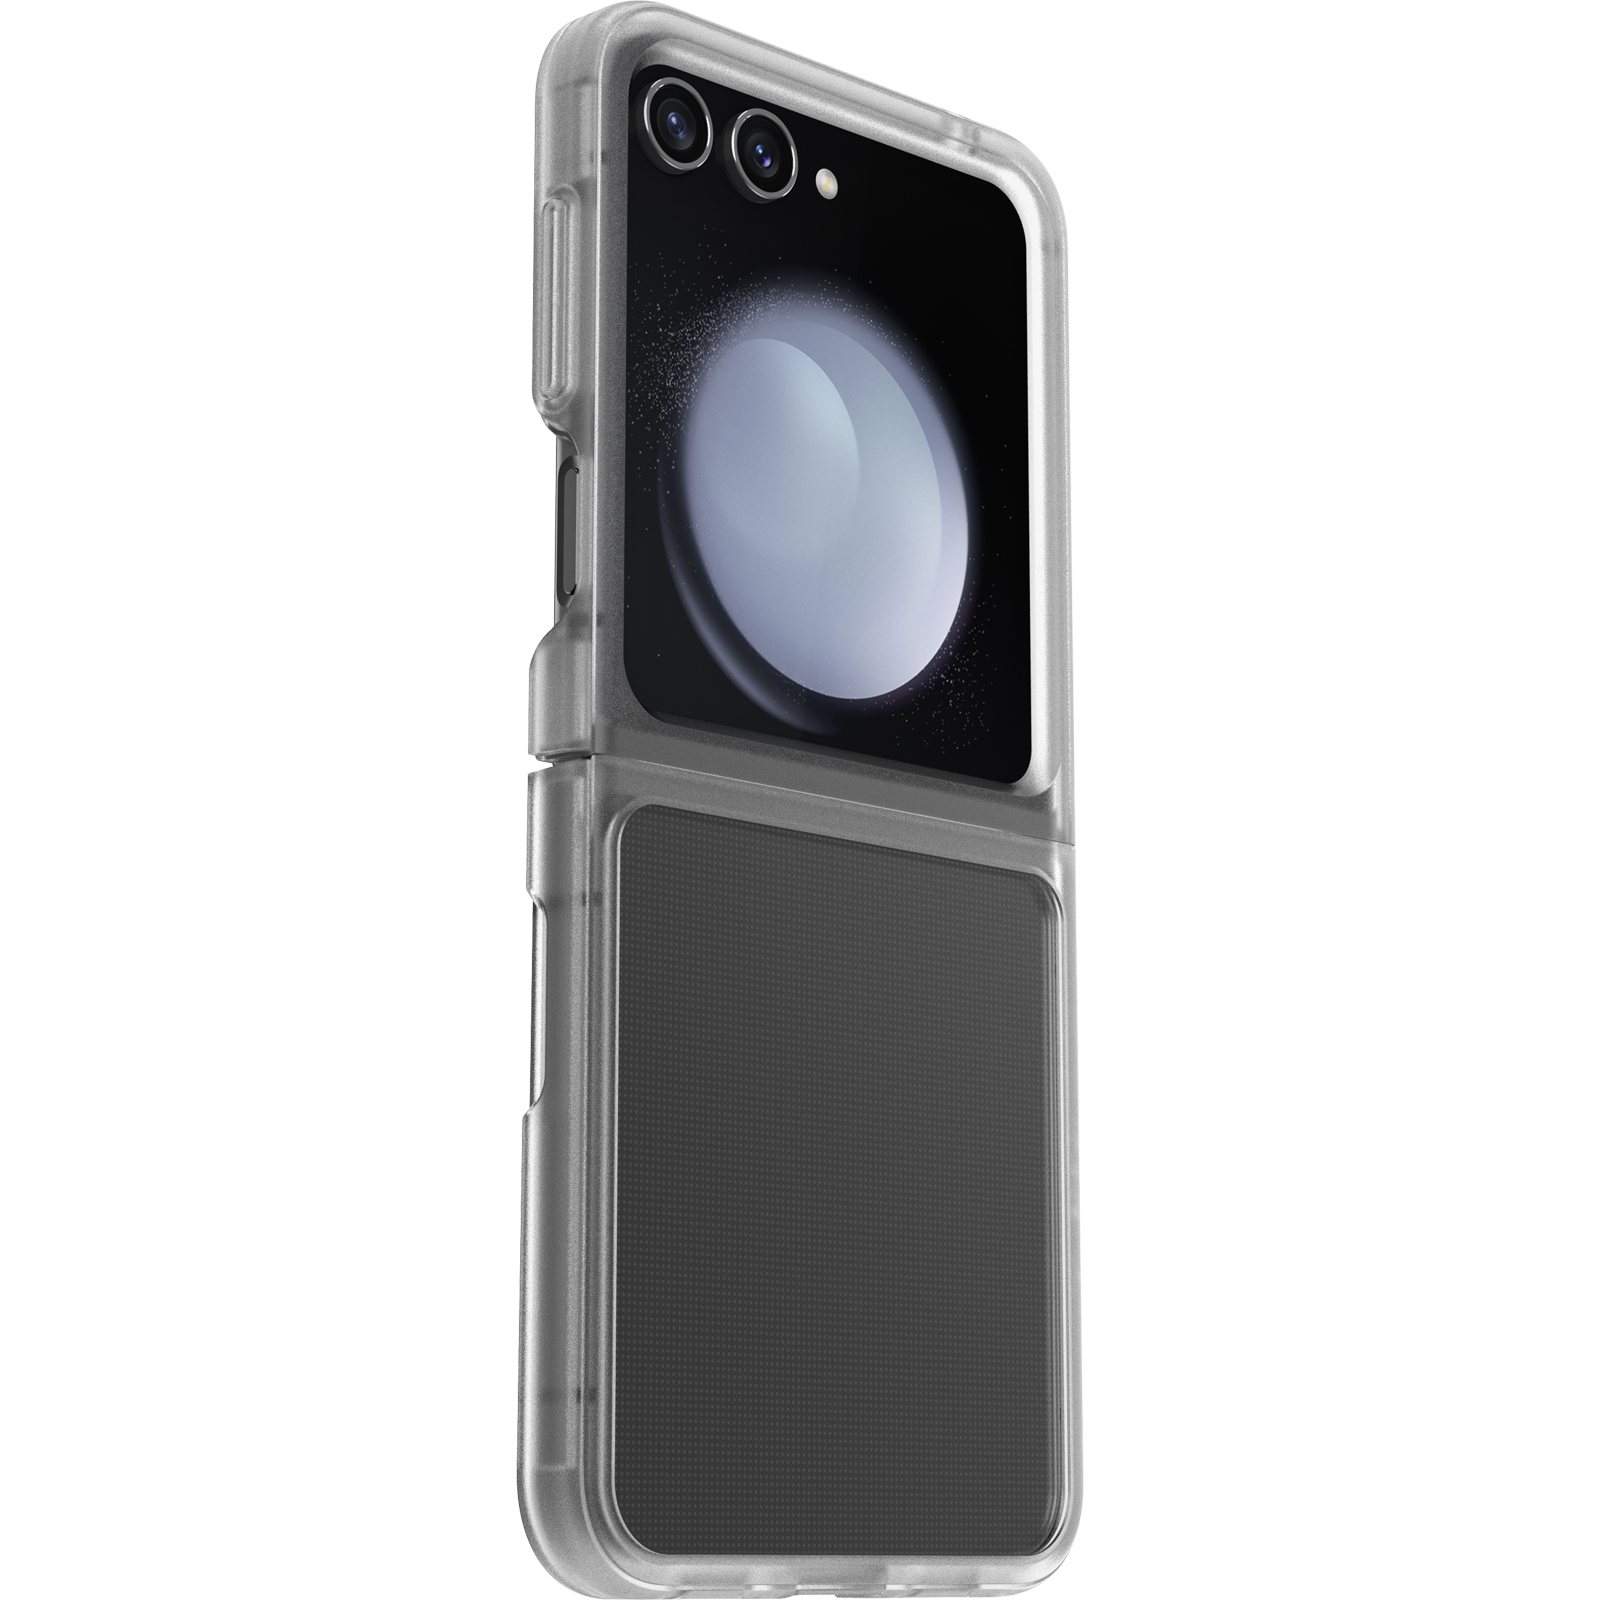 https://www.otterbox.com/on/demandware.static/-/Sites-masterCatalog/default/dwd3dae4ba/productimages/dis/cases-screen-protection/thin-flex-galaxy-z-flip-5/thin-flex-galaxy-z-flip-5-clear-2.jpg